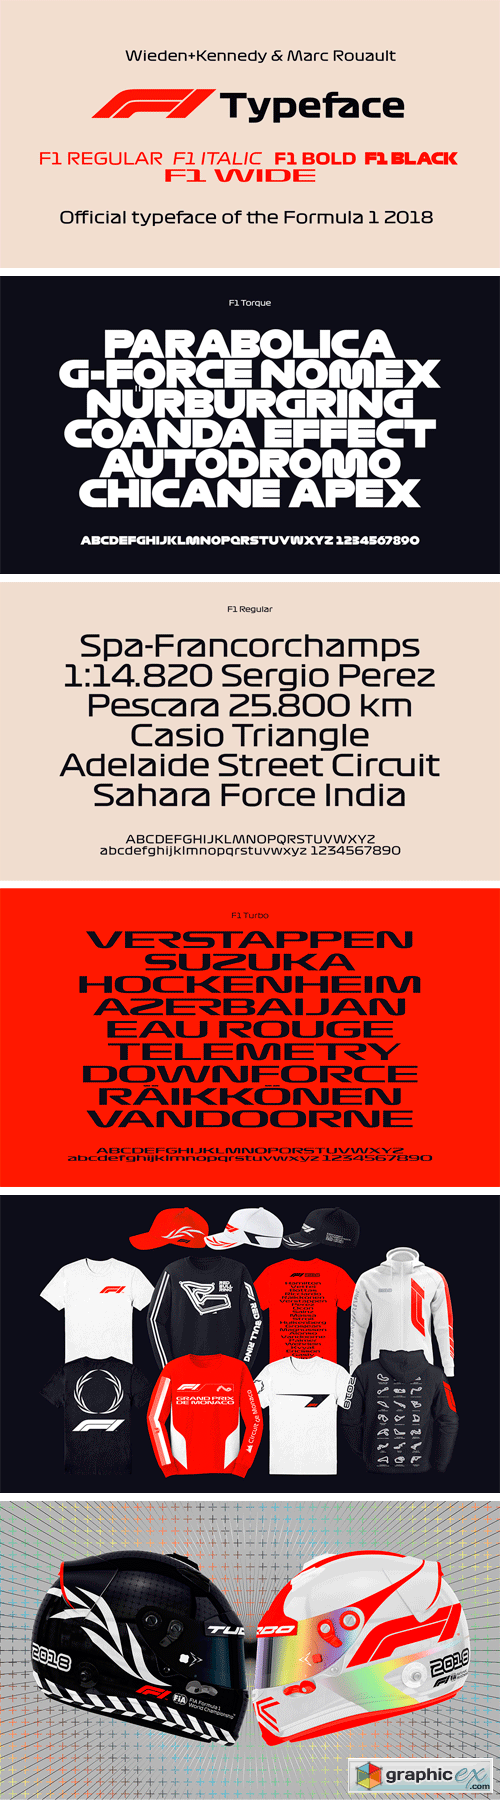 Formula 1 Display - Official Typeface of the Formula 1 2018